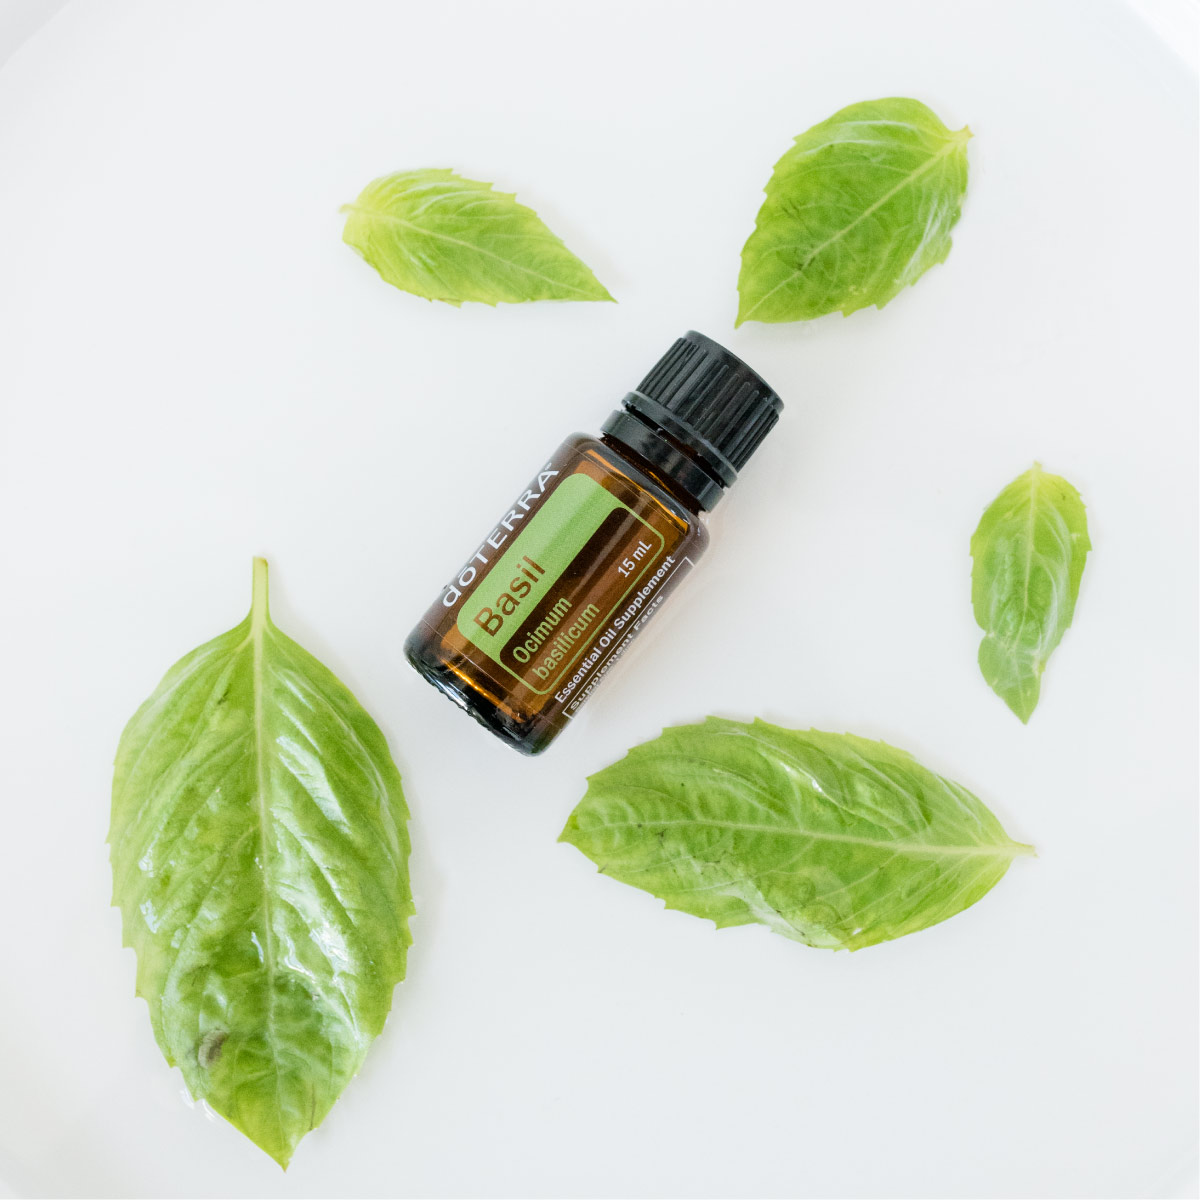 What blends well with Basil essential oil? Basil oil blends well with Lime oil, Bergamot oil, and Peppermint oil.